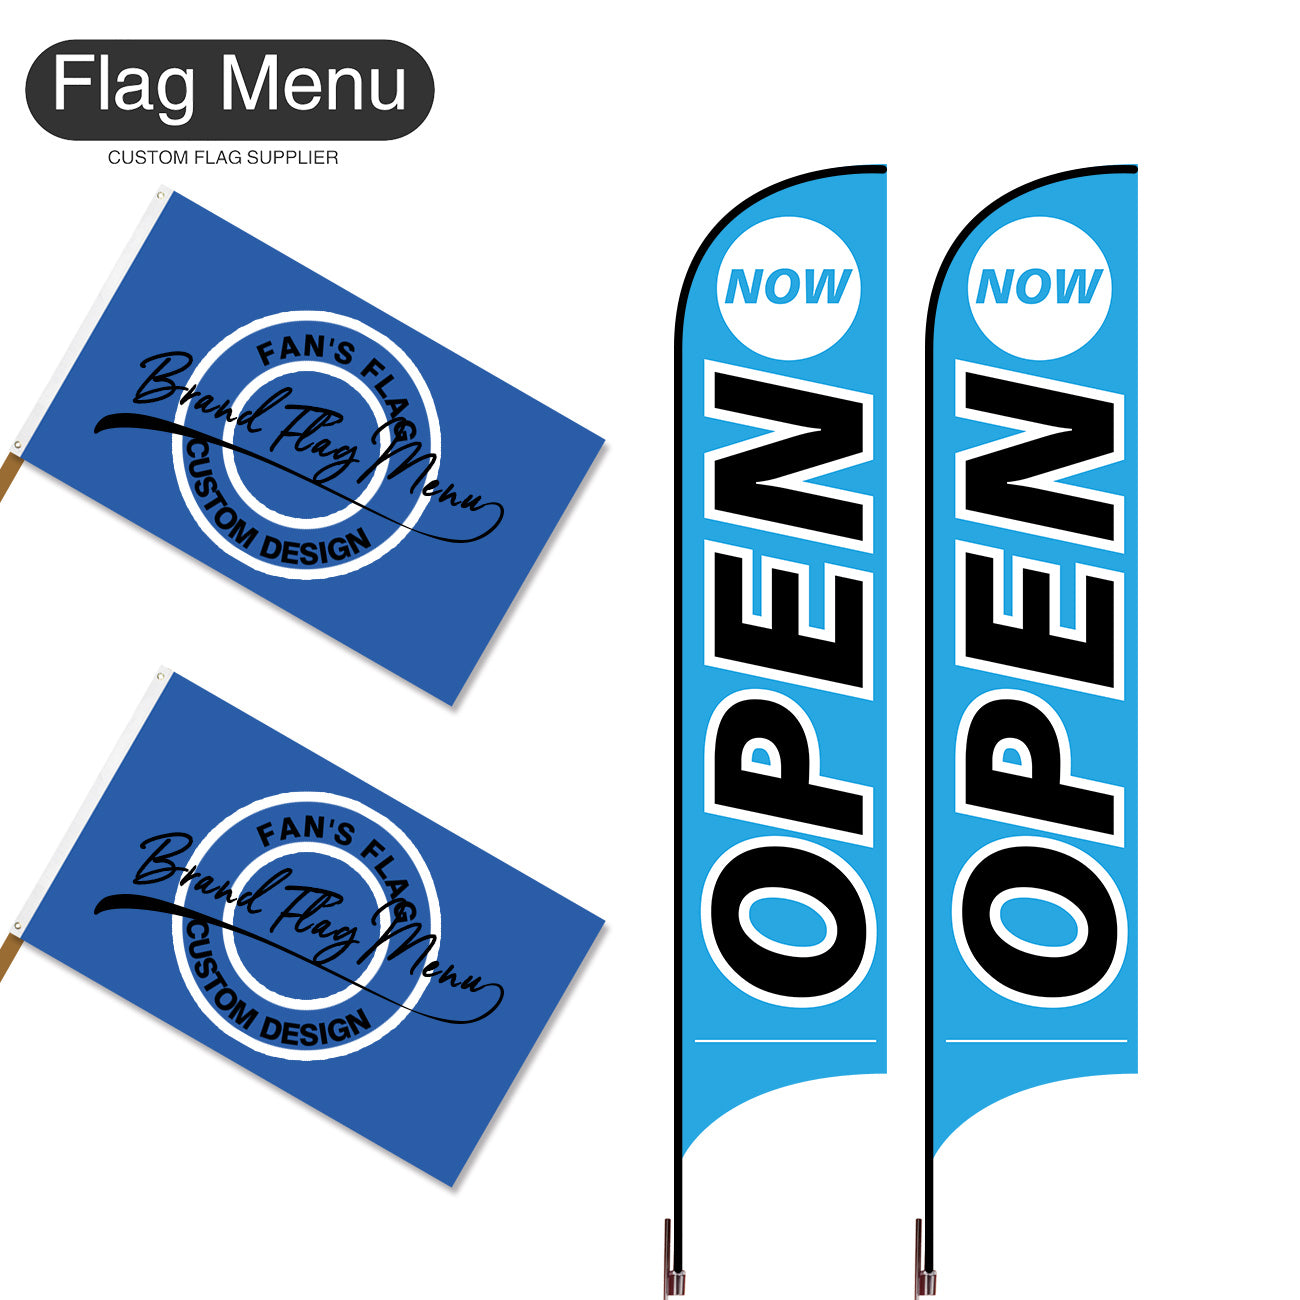 Outdoor Advertising Set - B-Blue A-S - Feather Flag -Double Sided & 3'x5' Regular Flag -Single Sided-Cross & Water Bag-Flag Menu